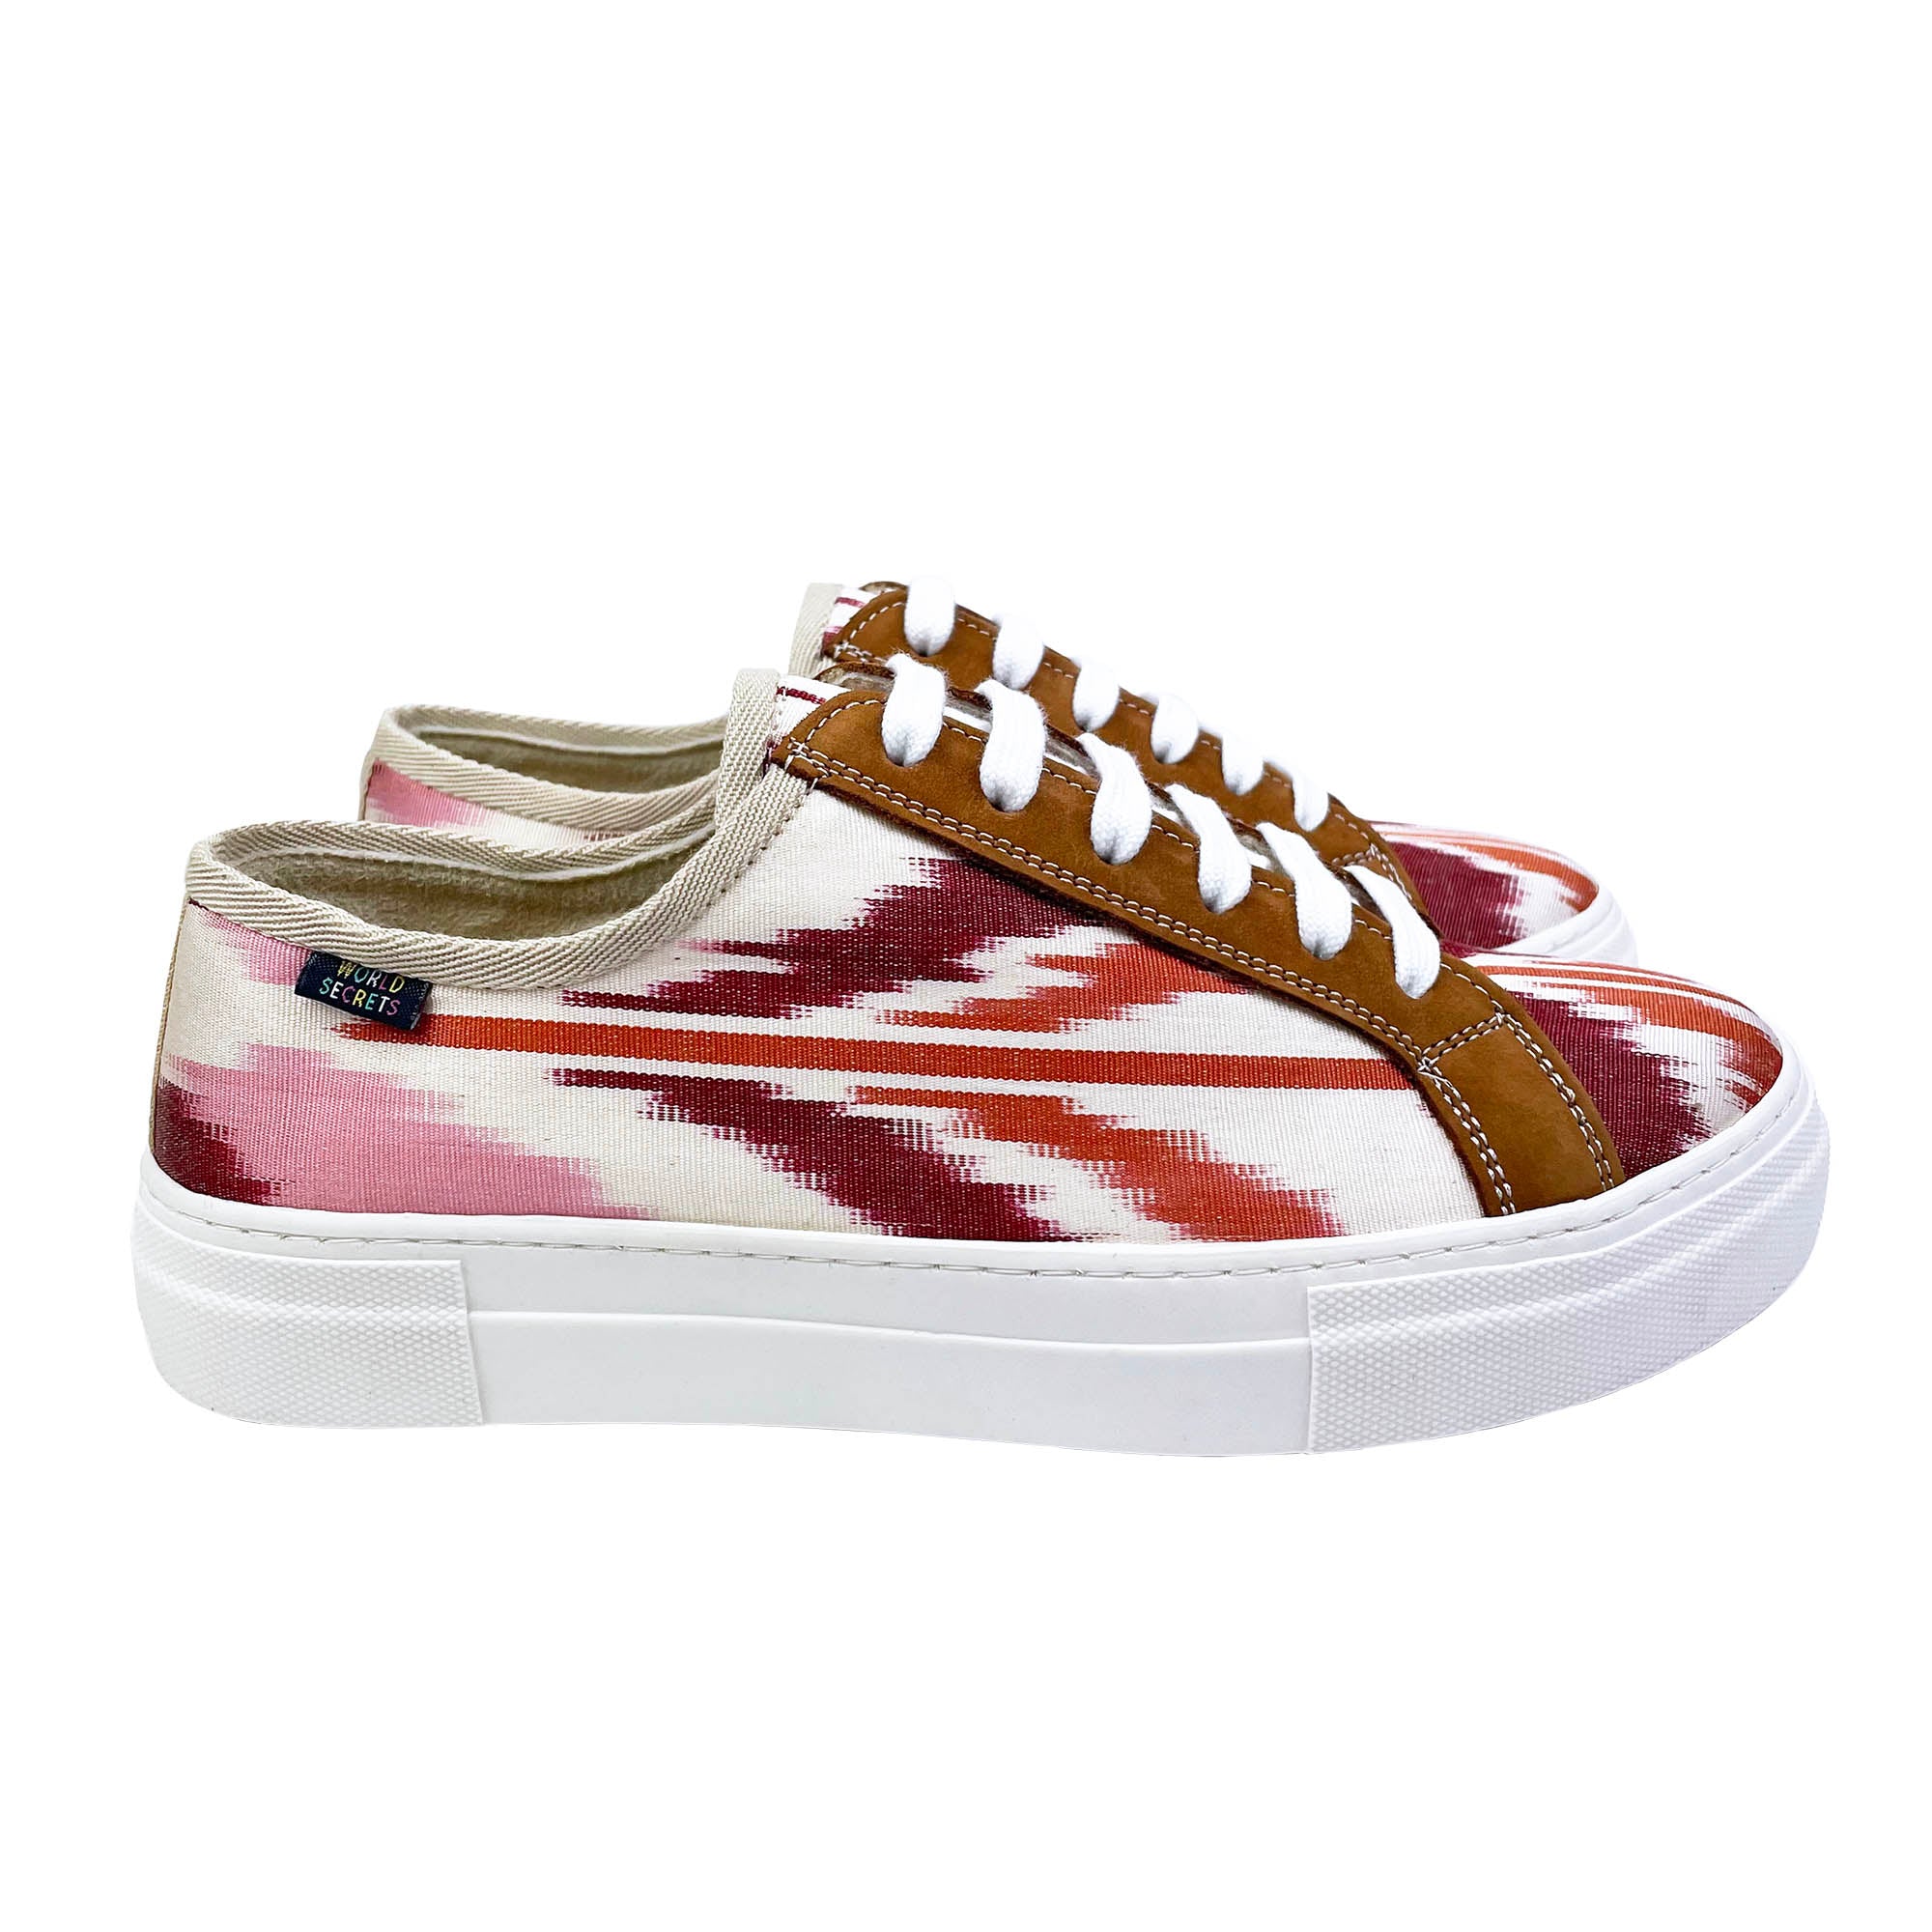 Red, orange, pink and white Ikat silk sneakers with tan leather and white laces